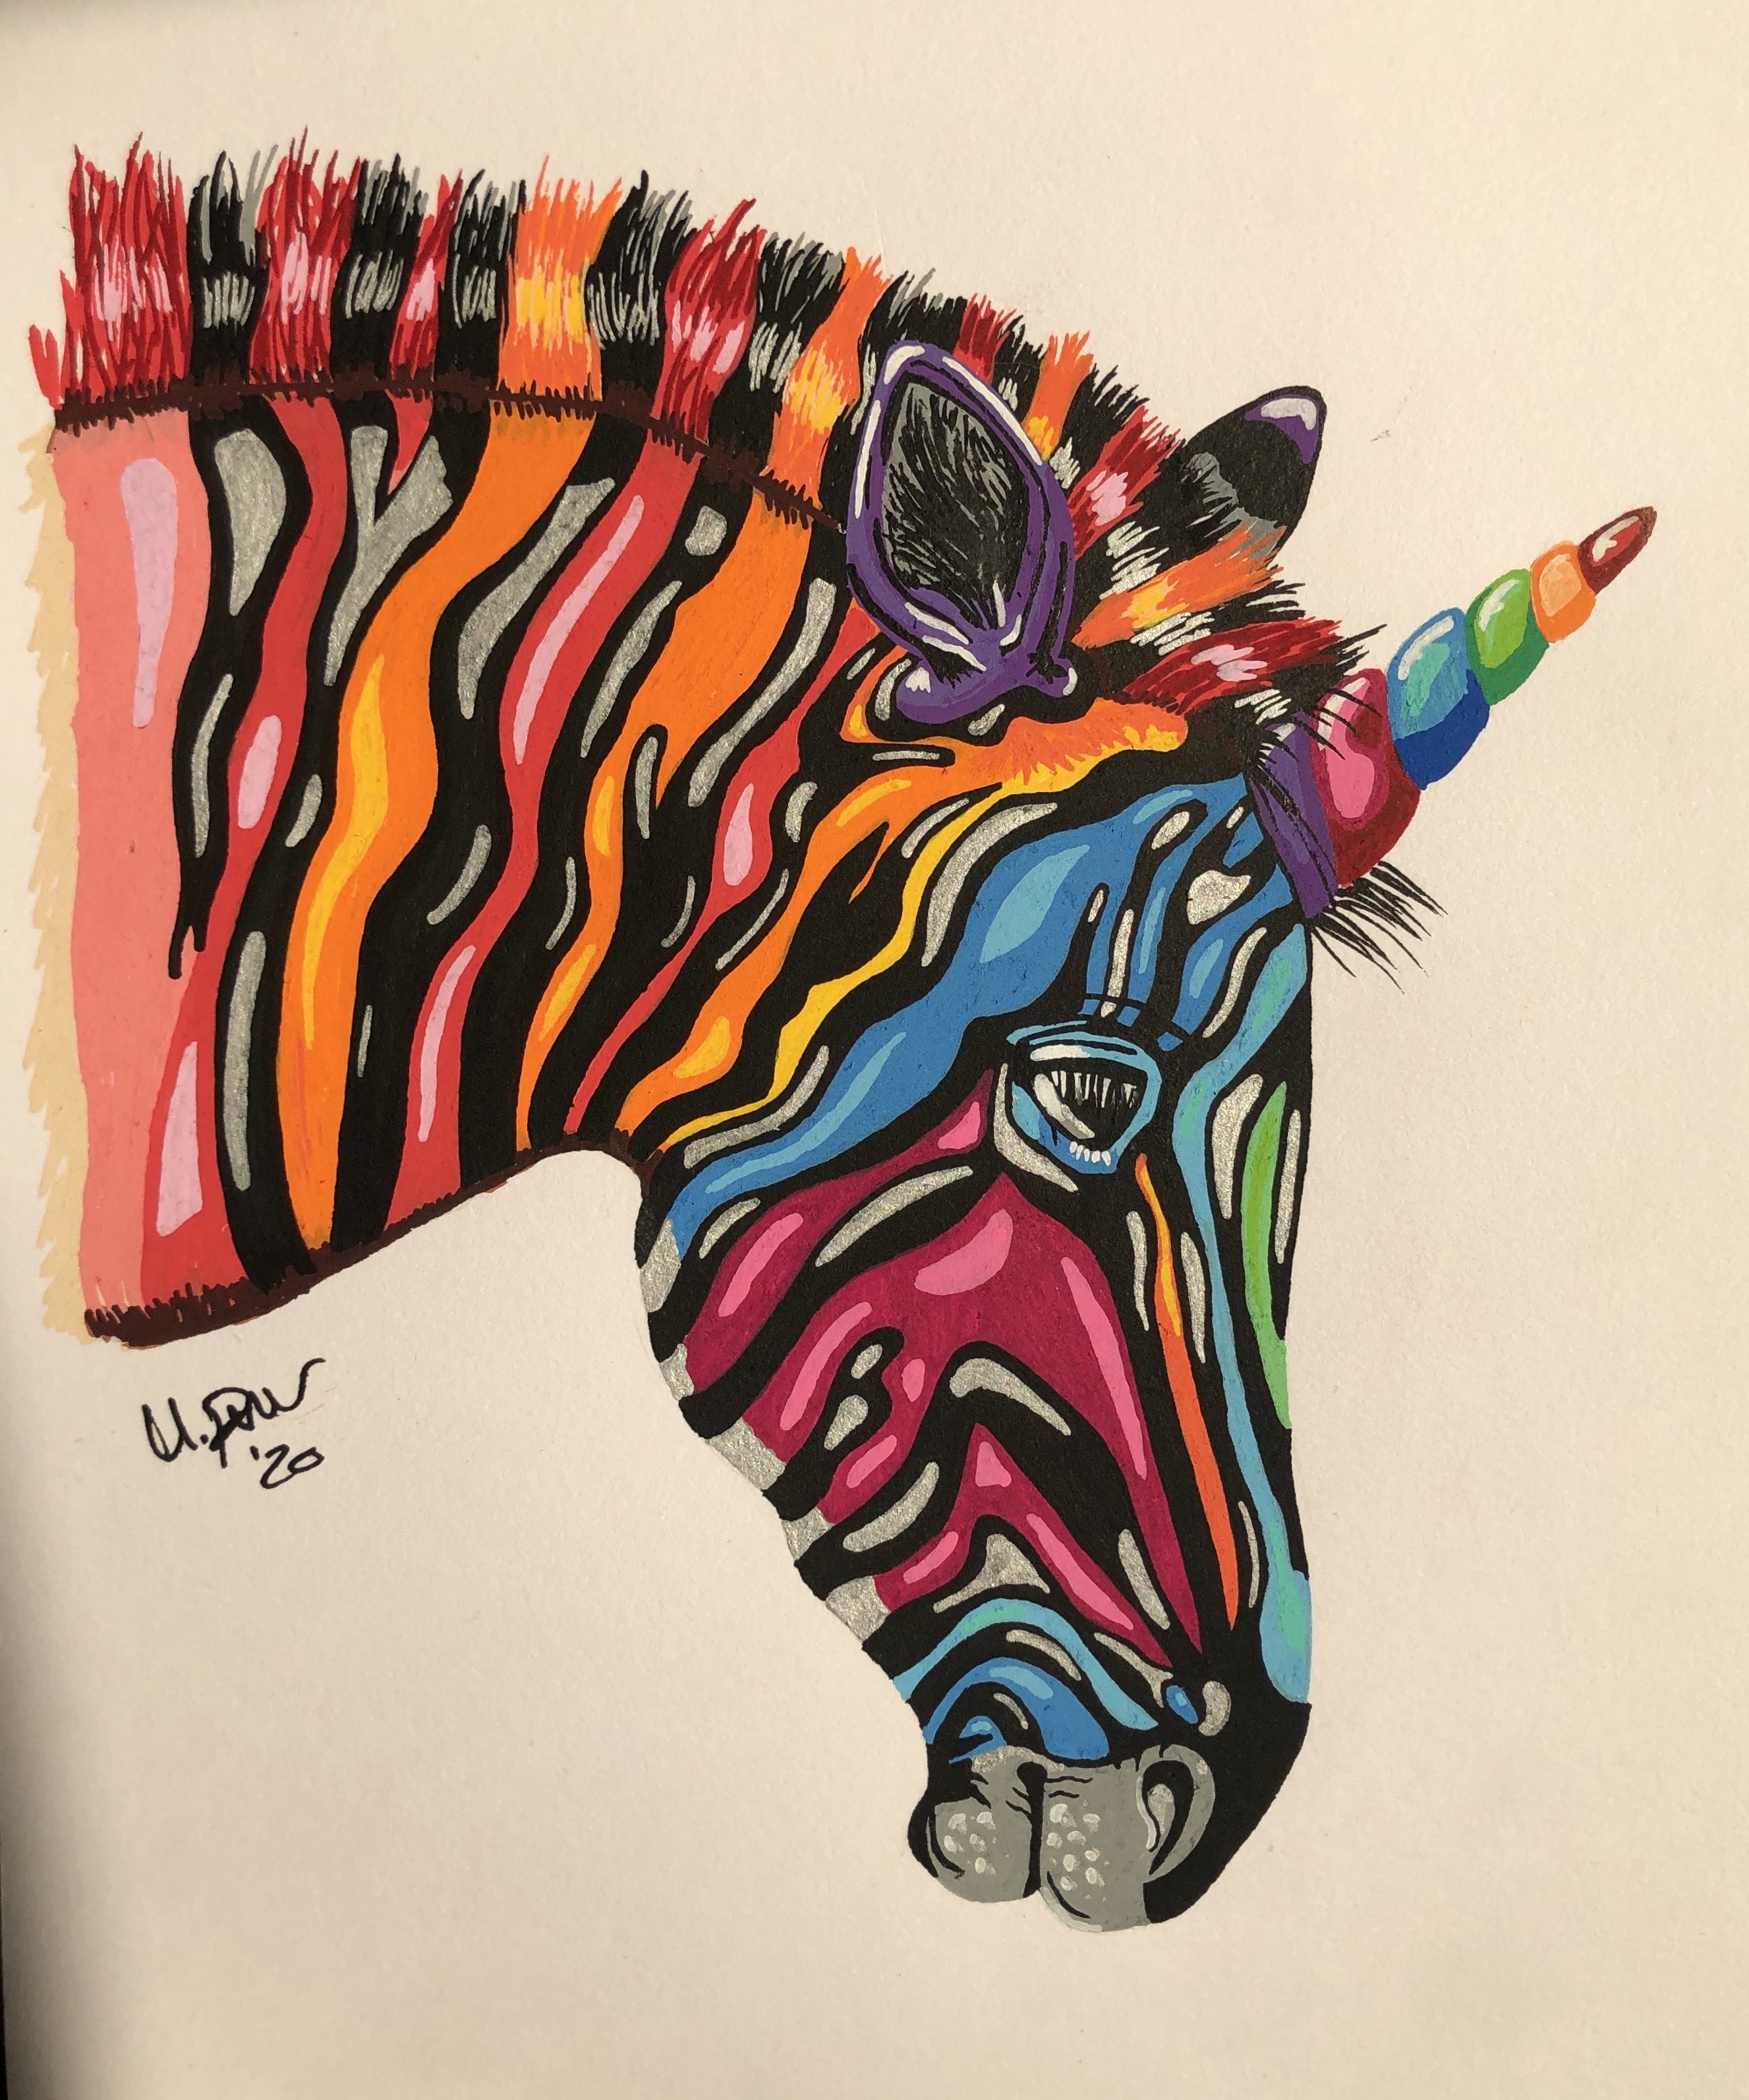 Rainbow Colored Pencil Zebra Baby by OwlsomeDelights on DeviantArt